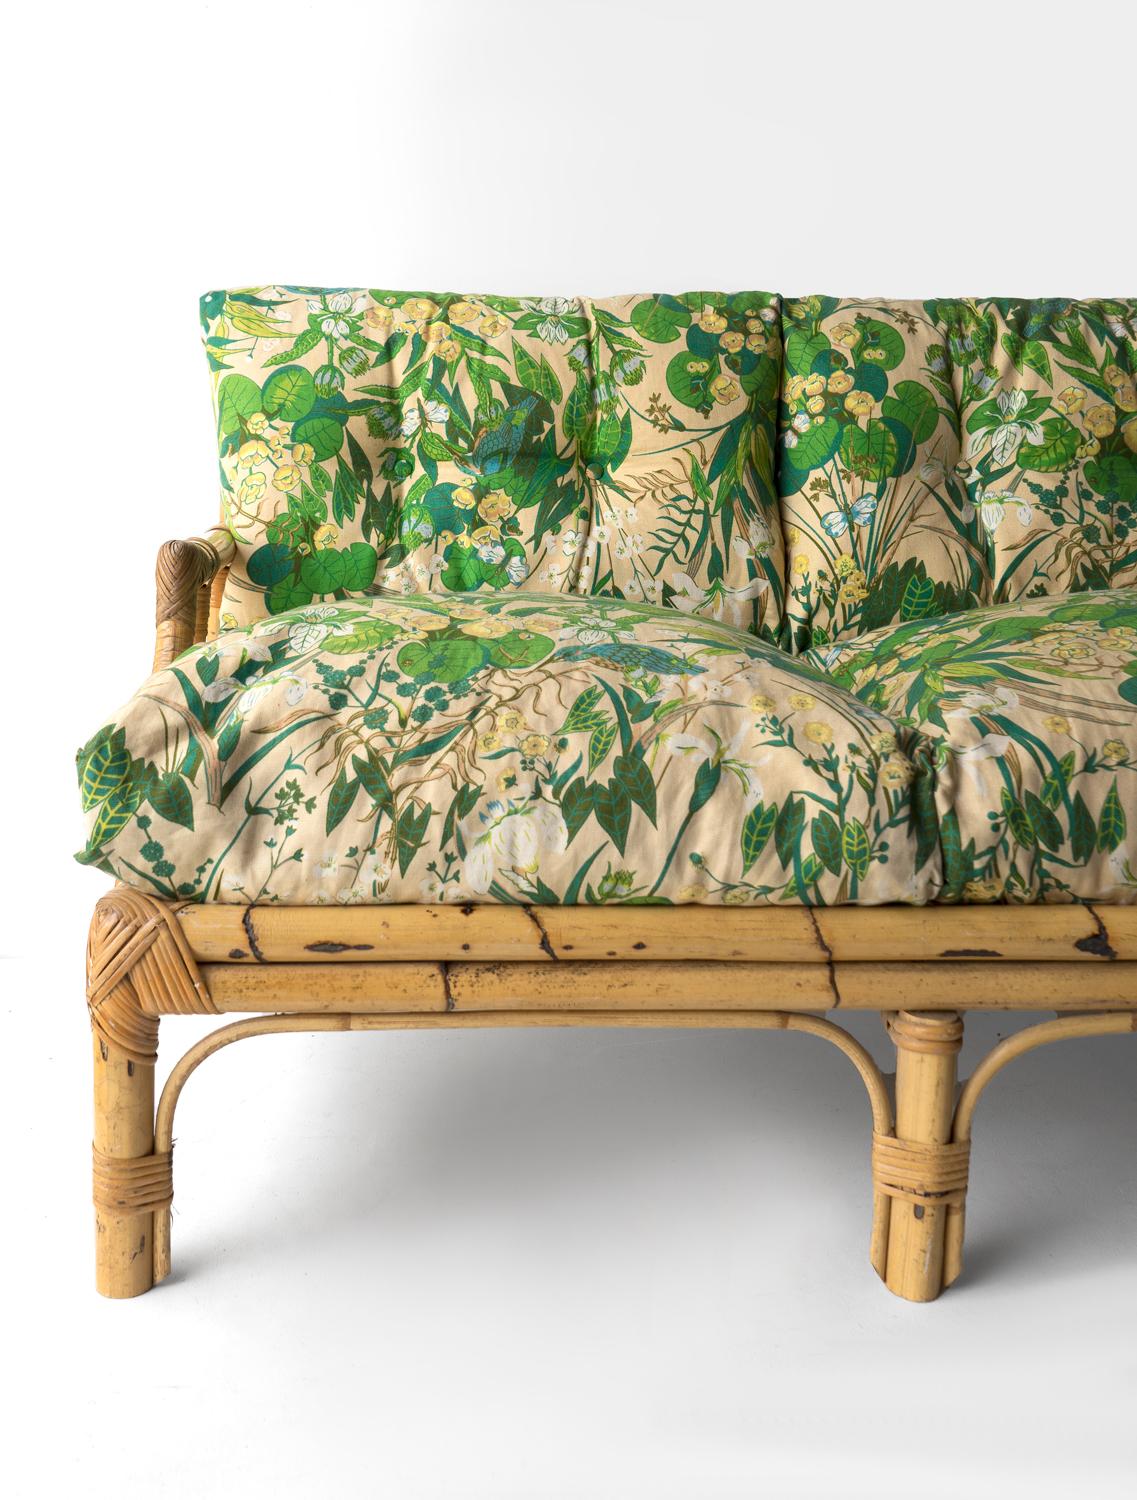 Vintage Italian Floral Upholstered Bamboo And Rattan Sofa By Vivai Del Sud 1970s 2